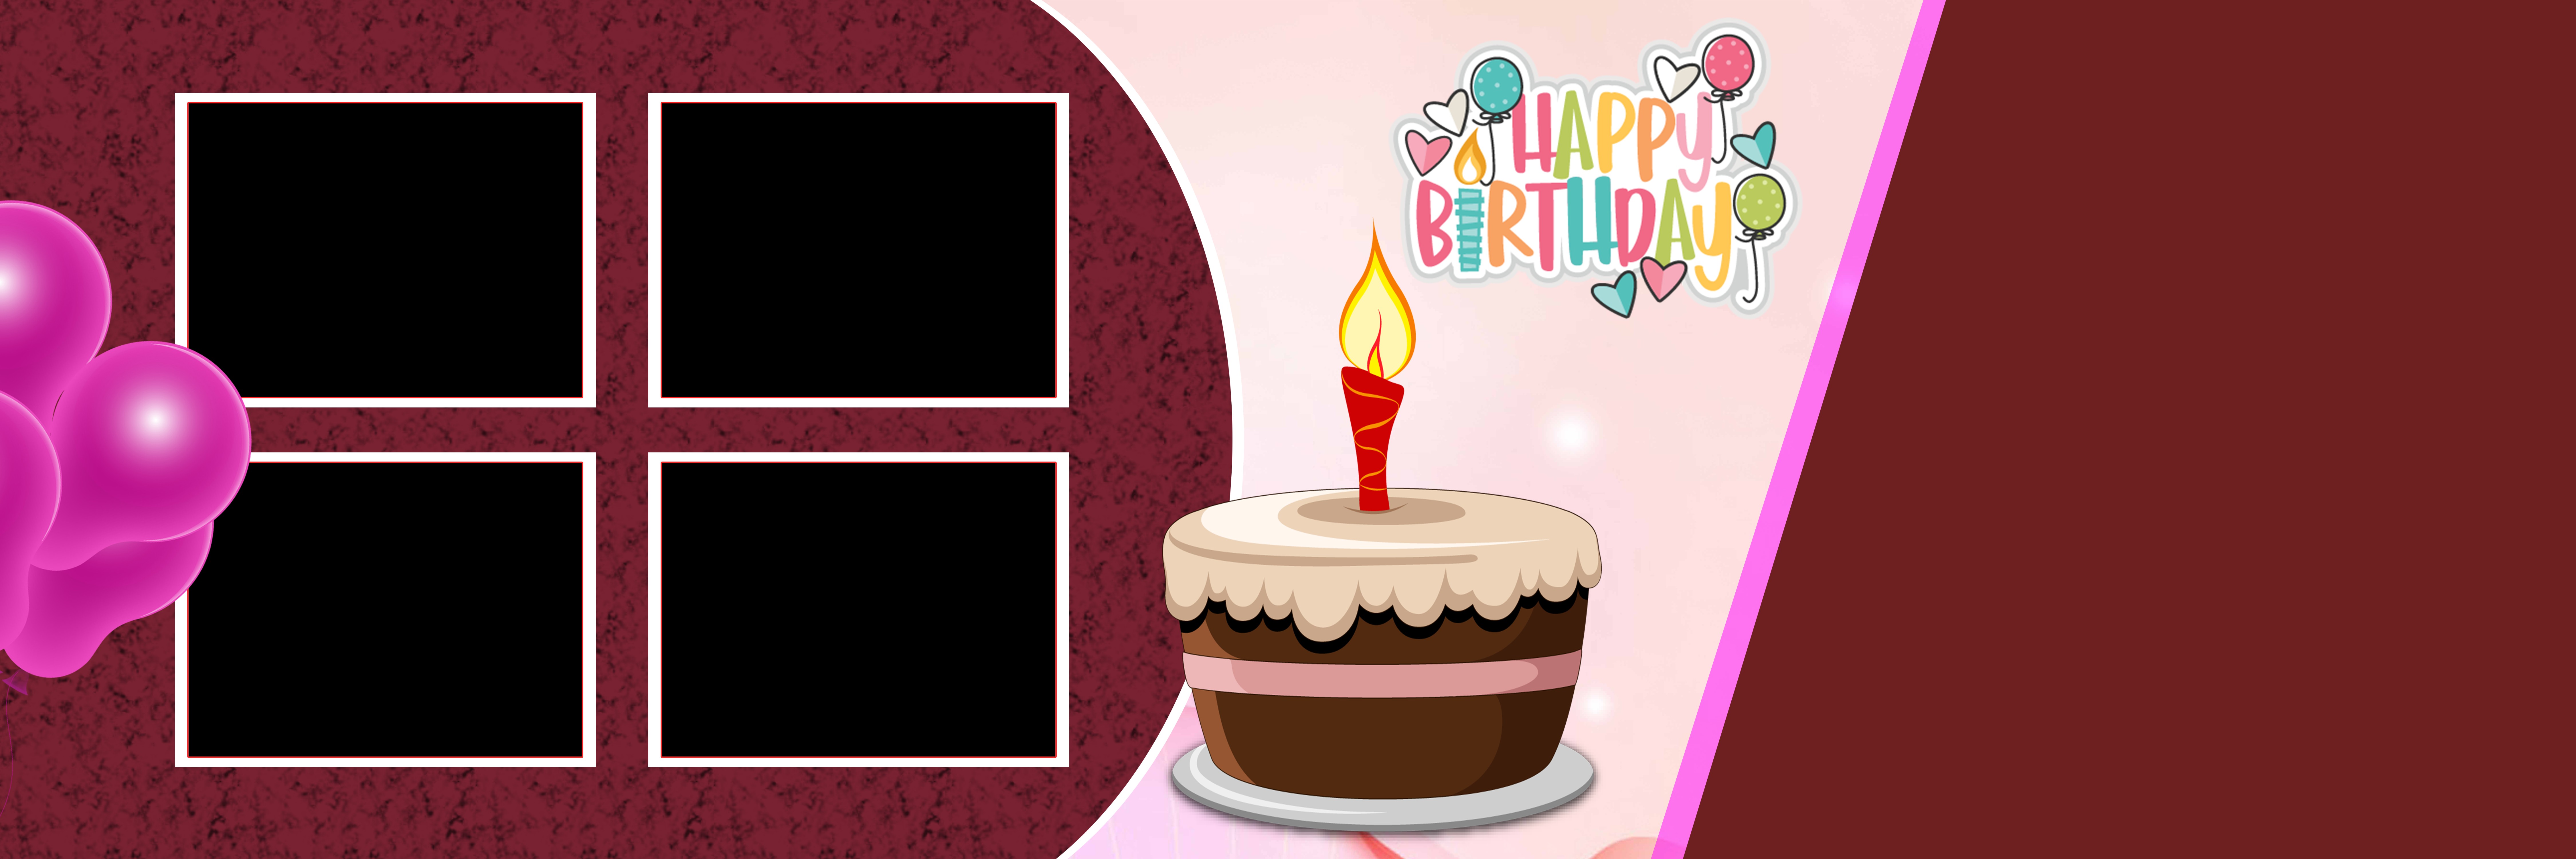 Birthday Card Template Free Download Psd 10 Birthday Card Template 